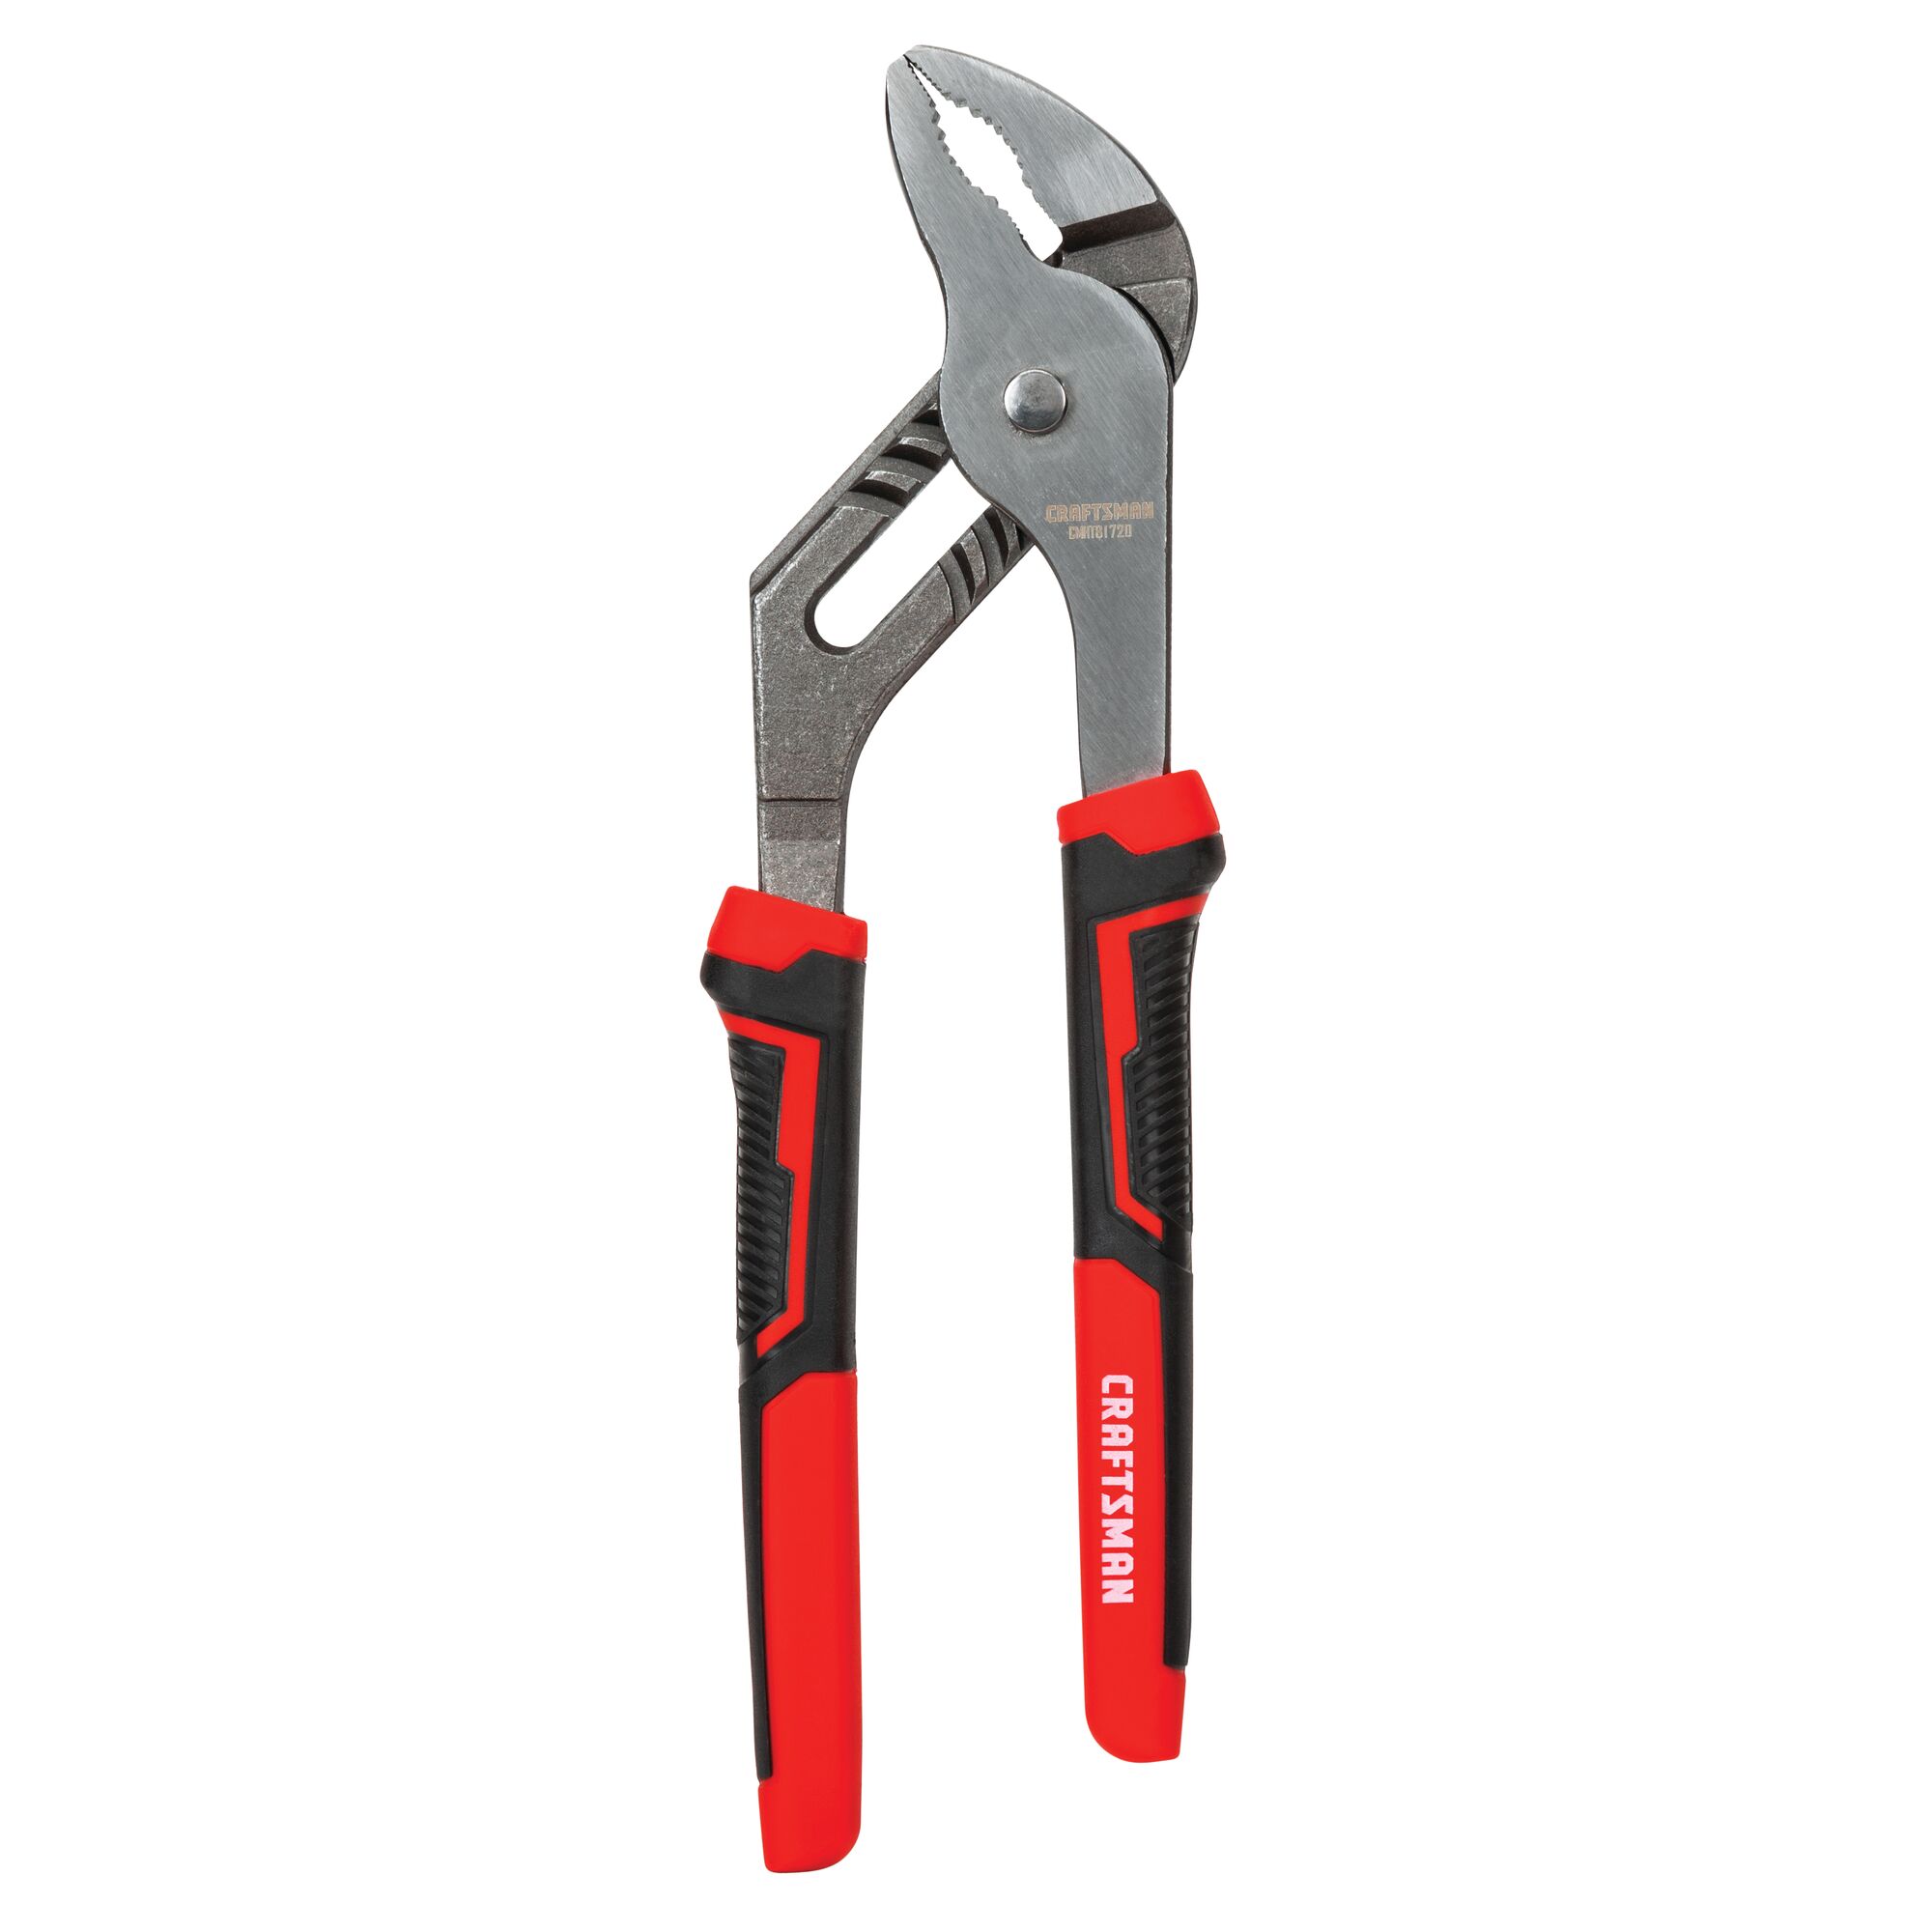 View of CRAFTSMAN Pliers: Joint on white background